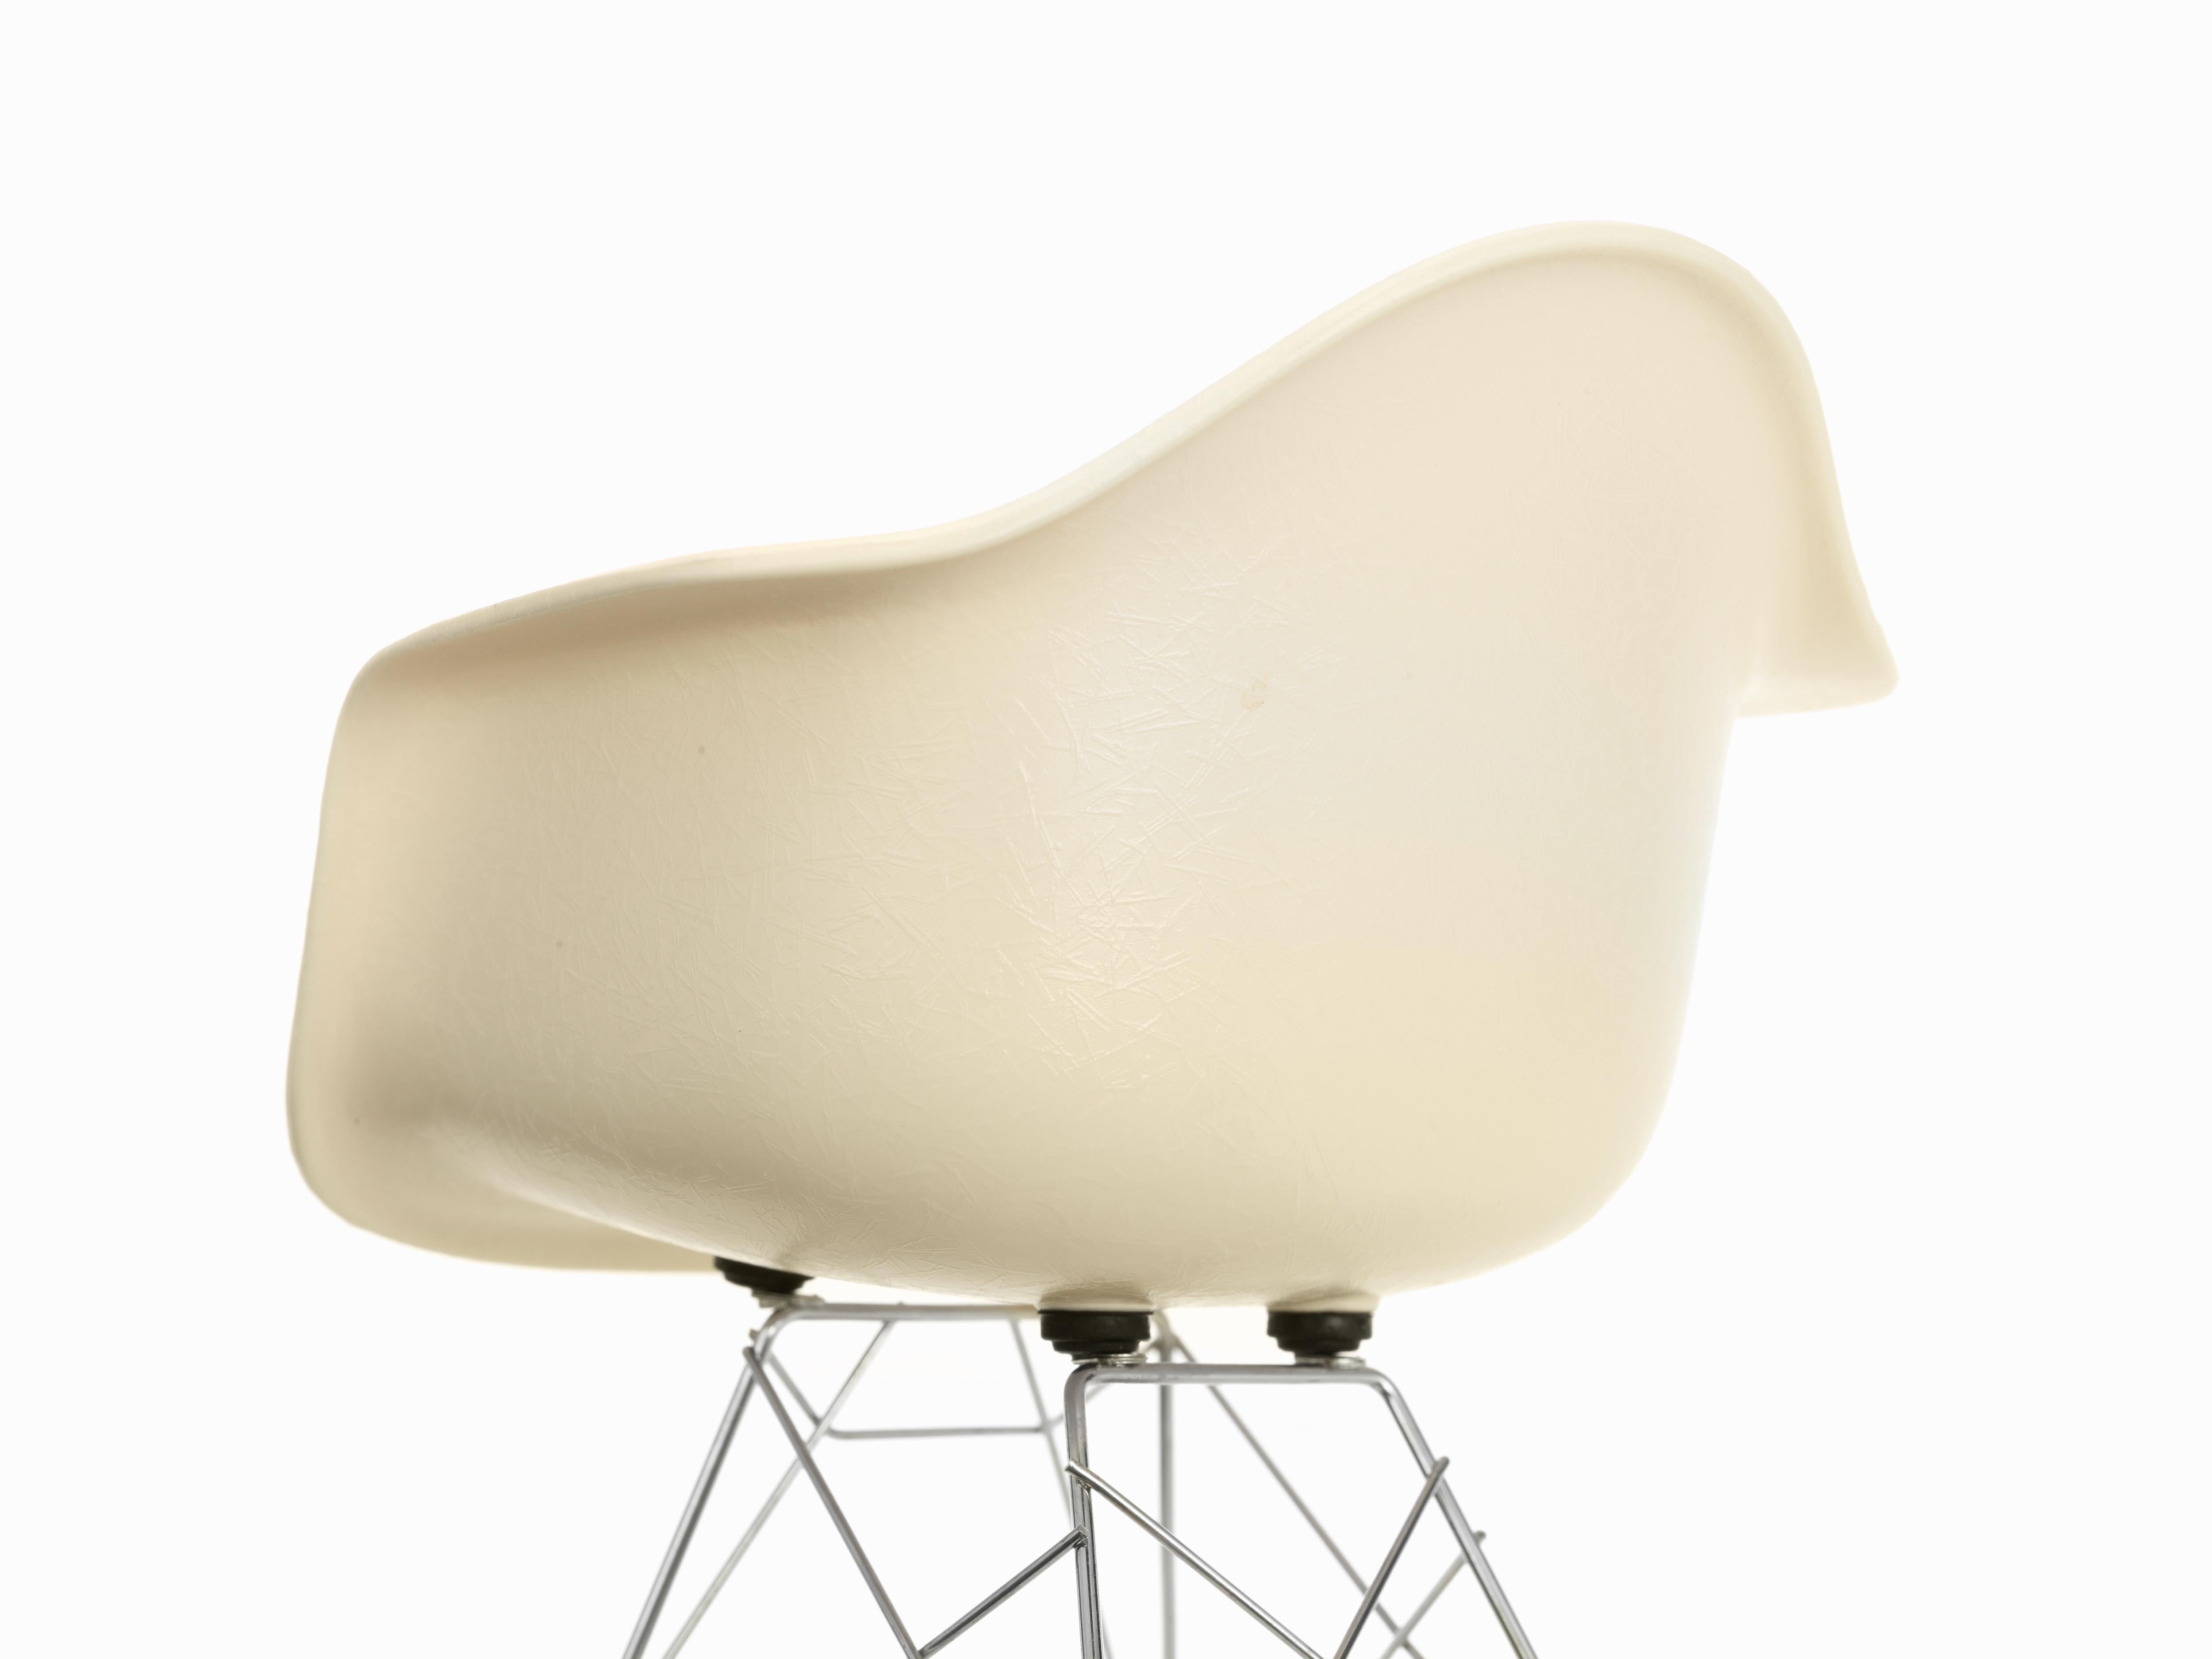 These items are currently only available in the United States.

The fiberglass chairs are rare examples of a satisfying synthesis of formal and technical innovation. For the first time in the history of design, Charles and Ray Eames utilized the